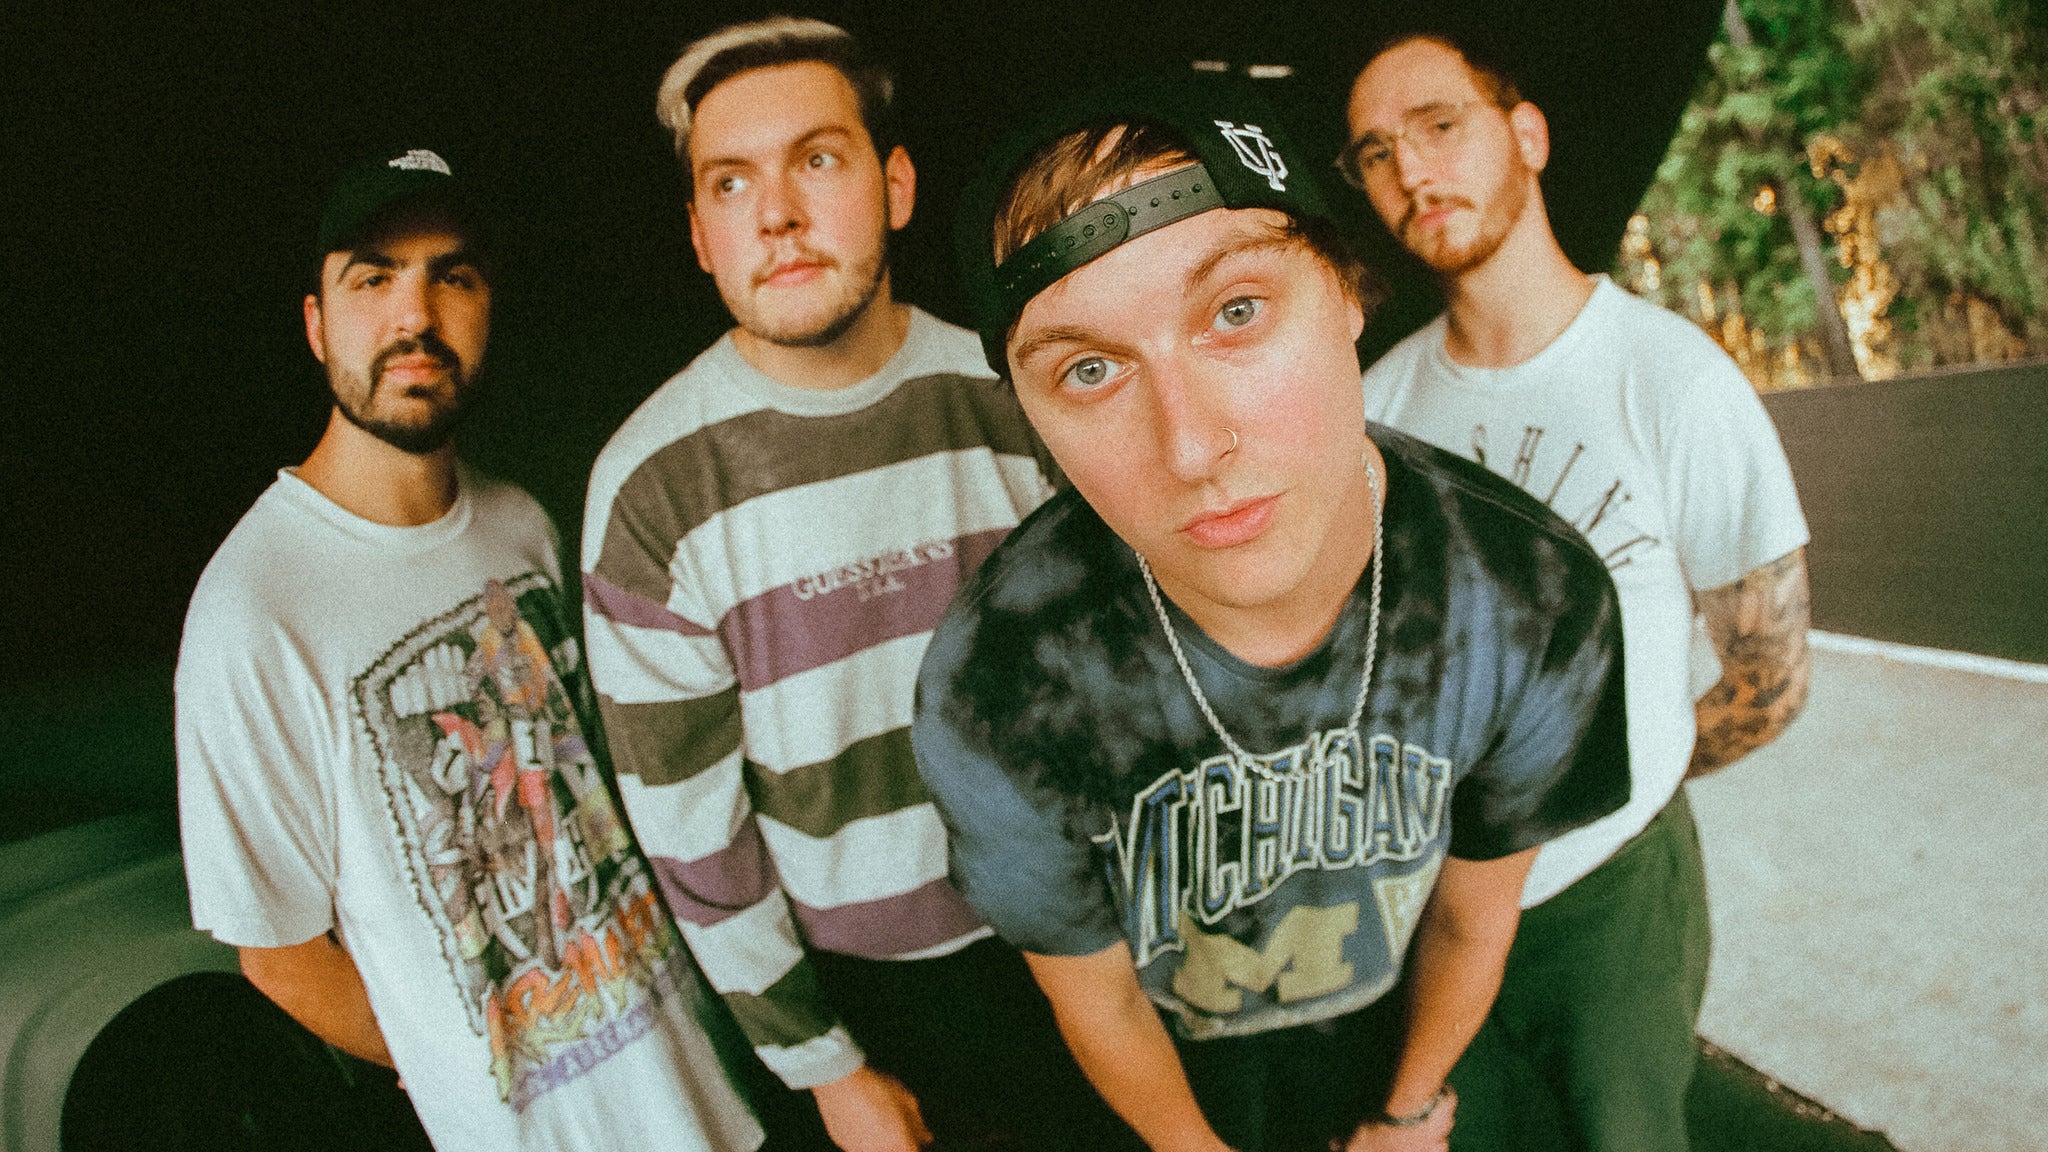 State Champs in Atlanta promo photo for Me + 3 Promotional  presale offer code